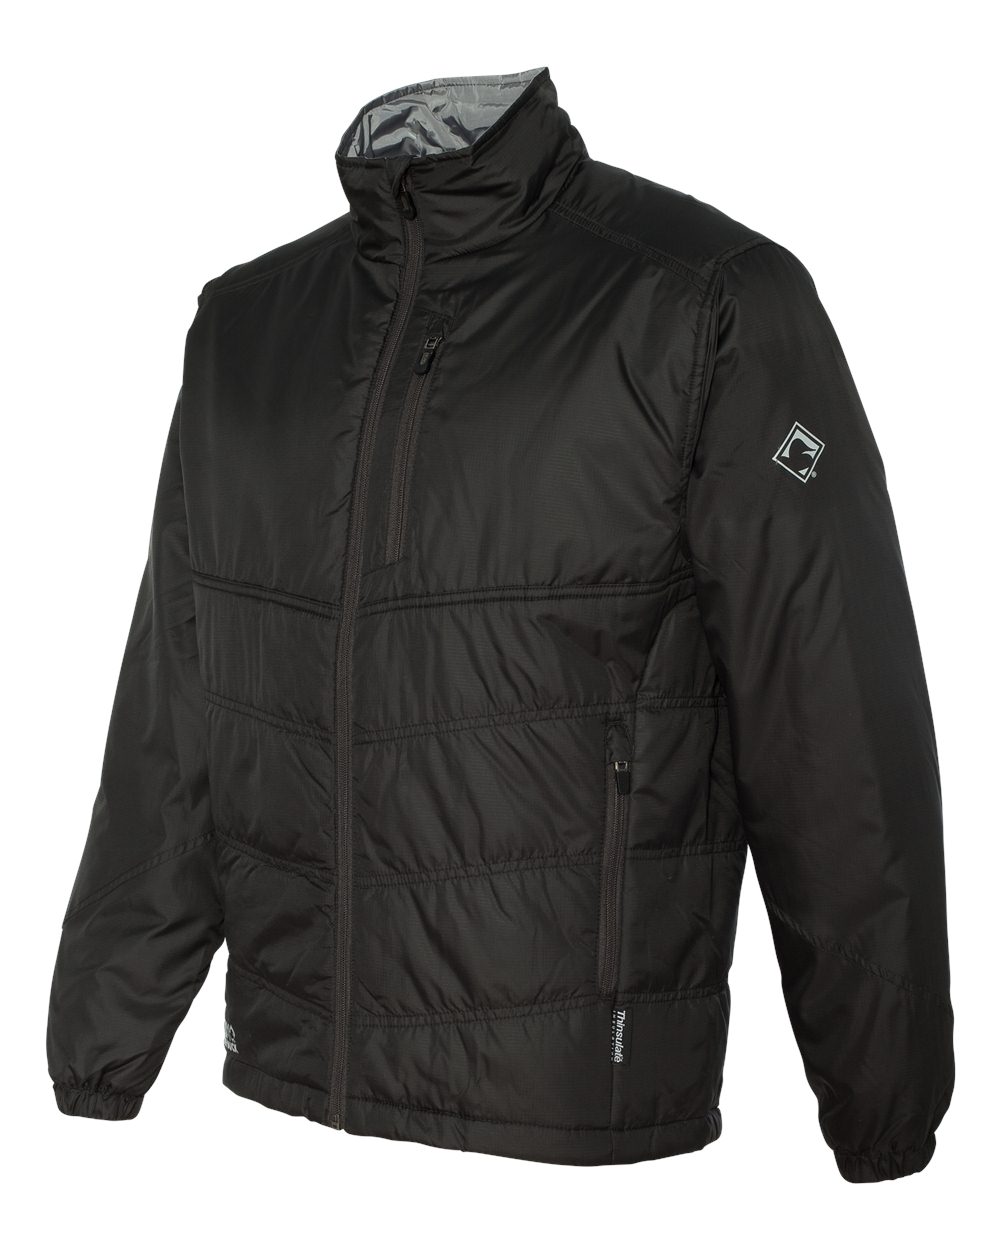 DRI DUCK 5321 - Eclipse Thinsulate Lined Puffer Jacket $82.49